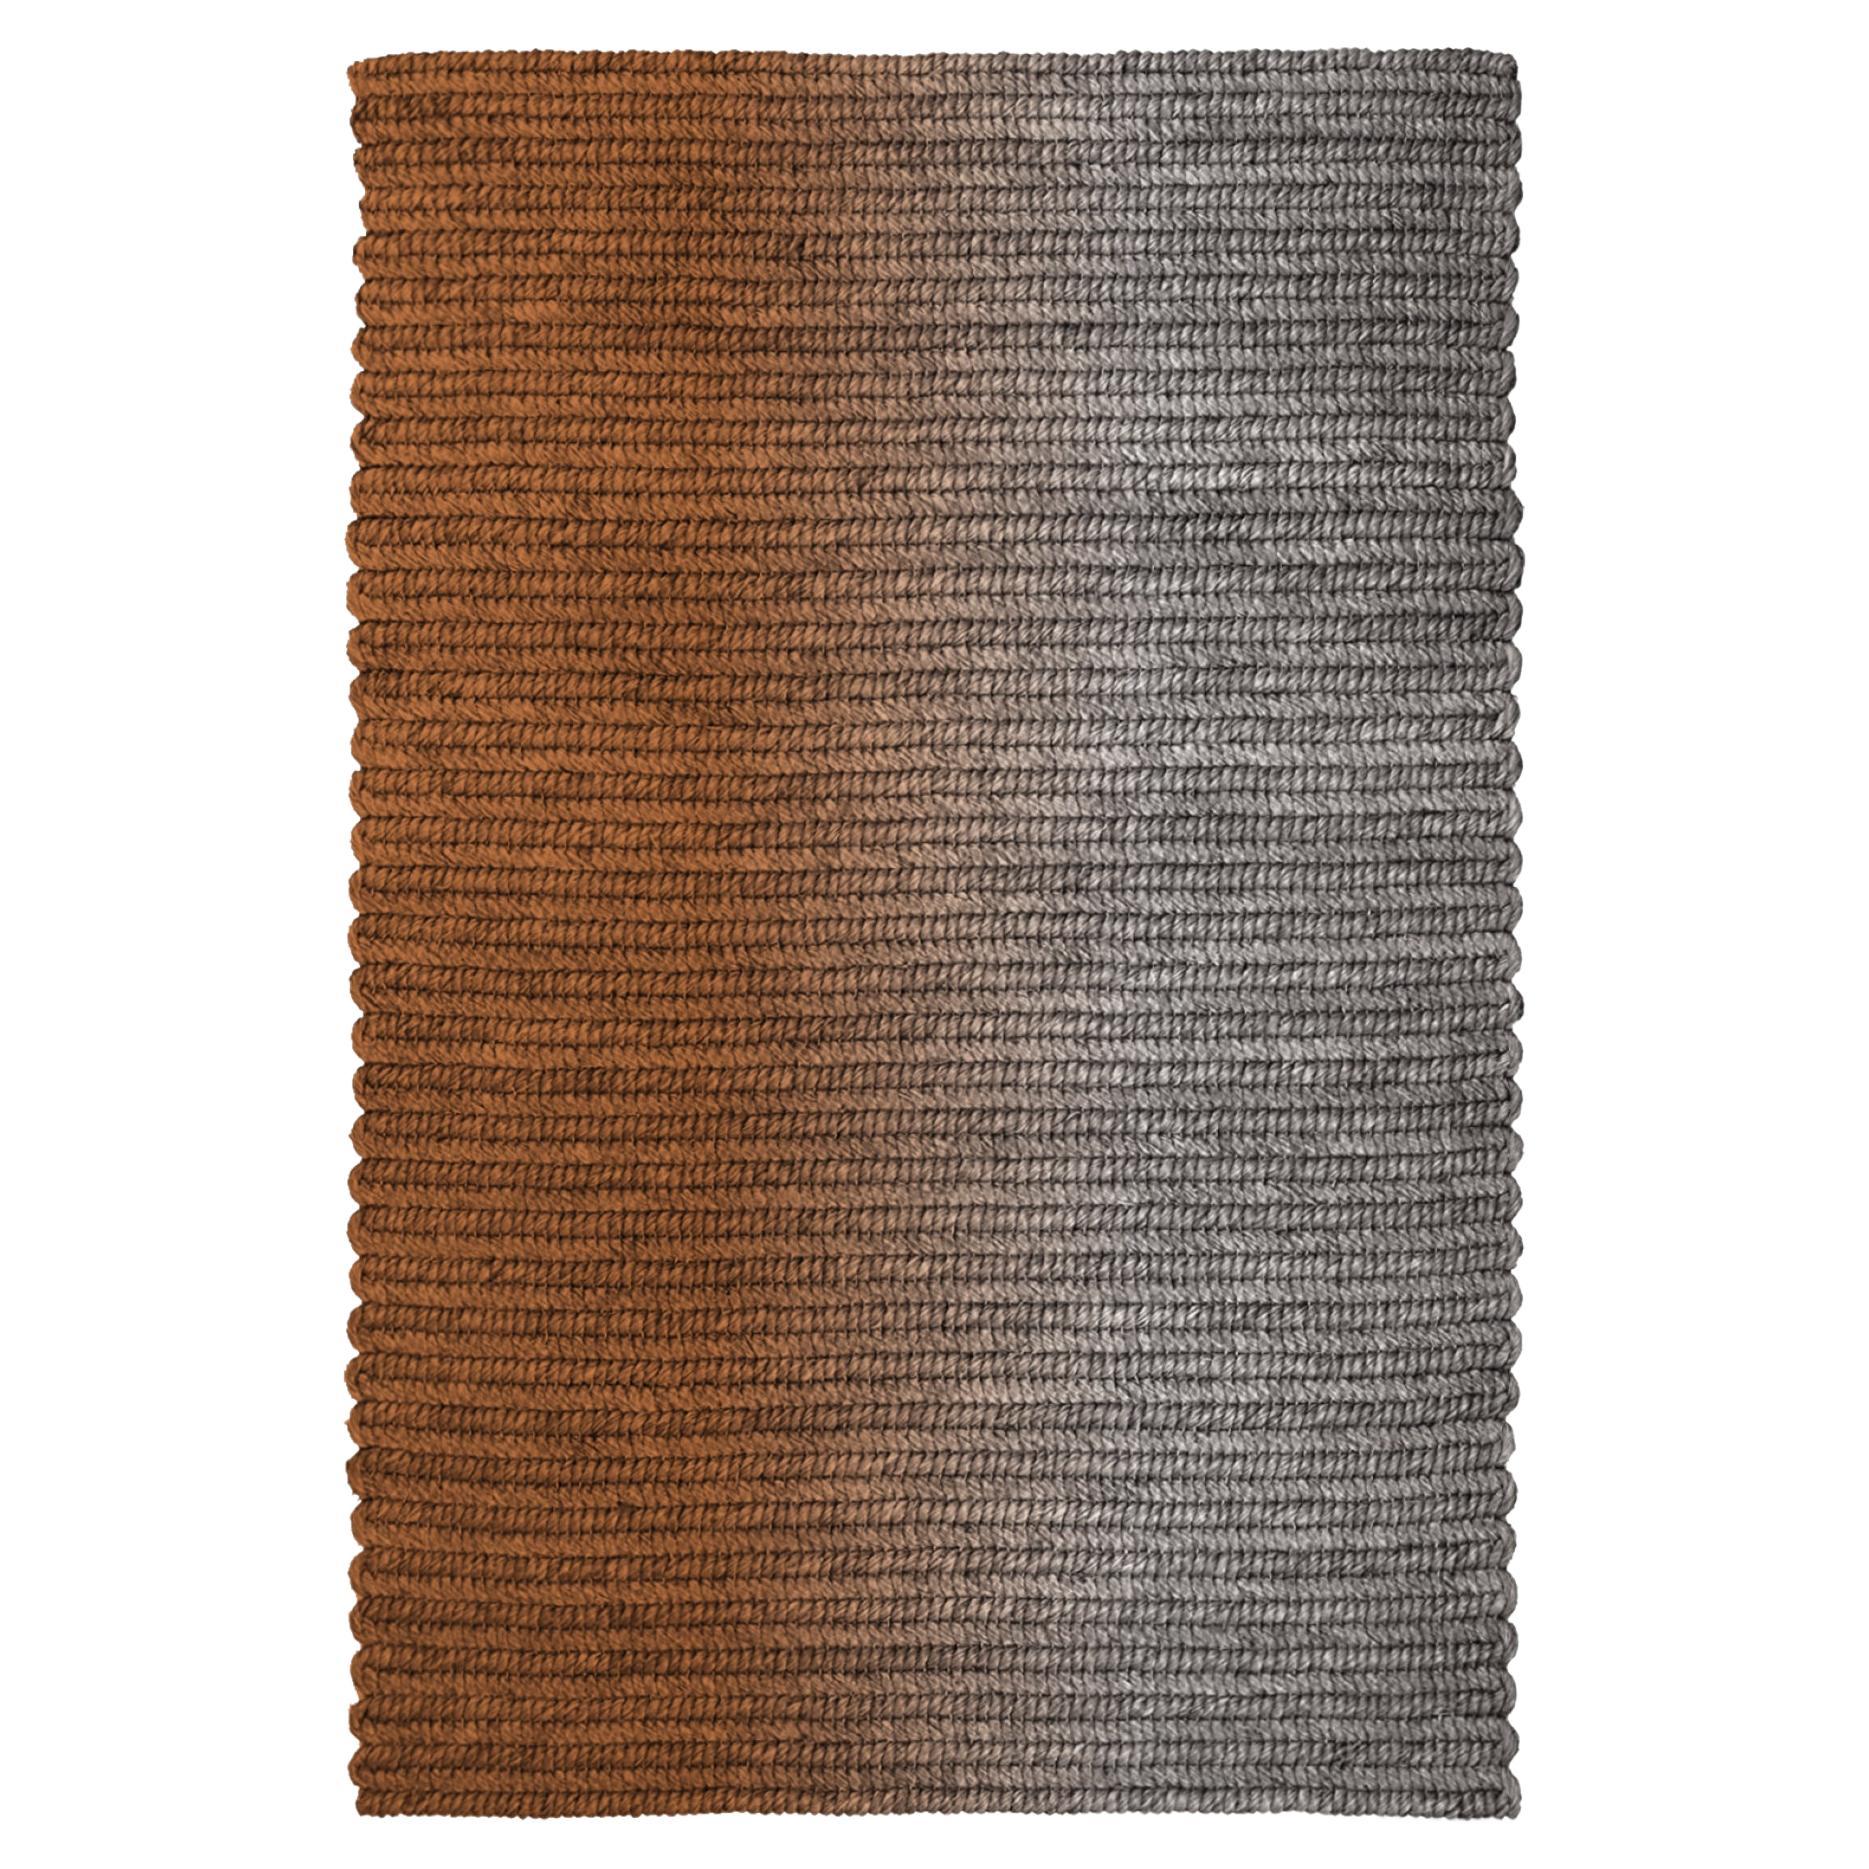 Claire Vos for Musett 'Switch' Abaca Indoor Rug in Mahogany, in 160 x 240 cm For Sale